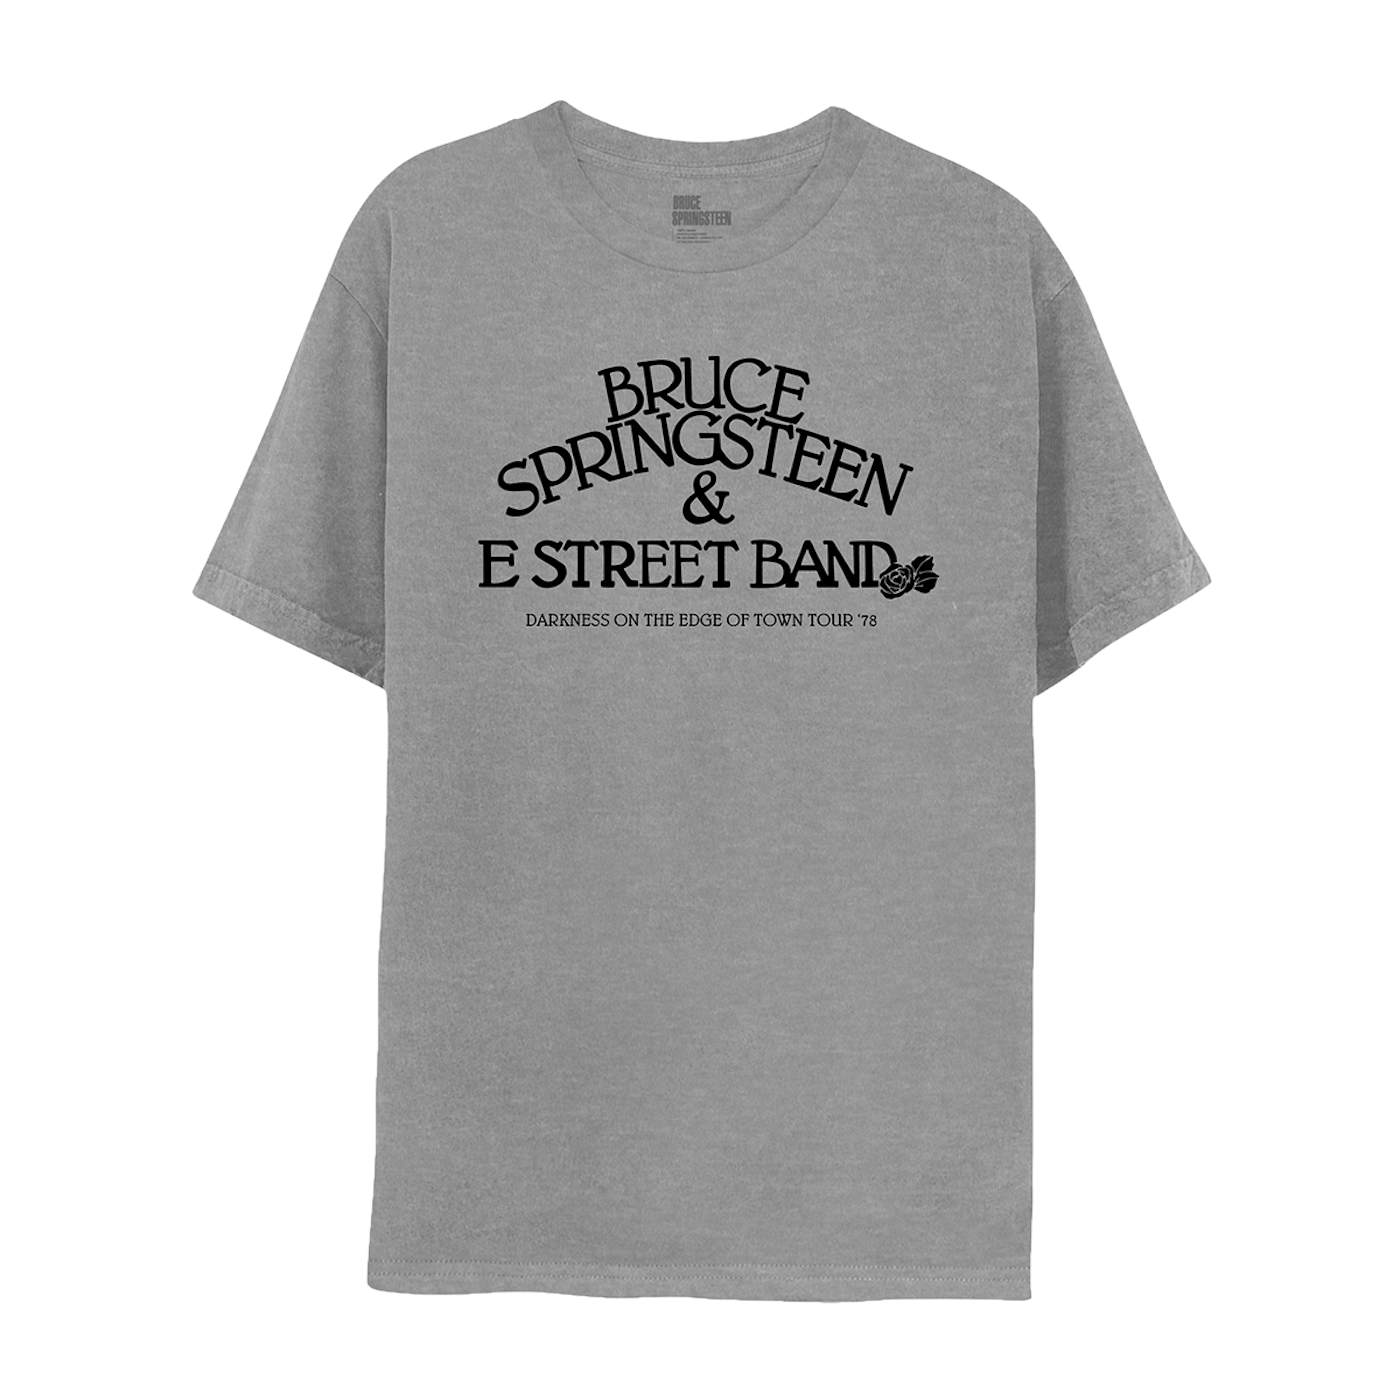 Bruce Springsteen and the Street Band Gray Tee